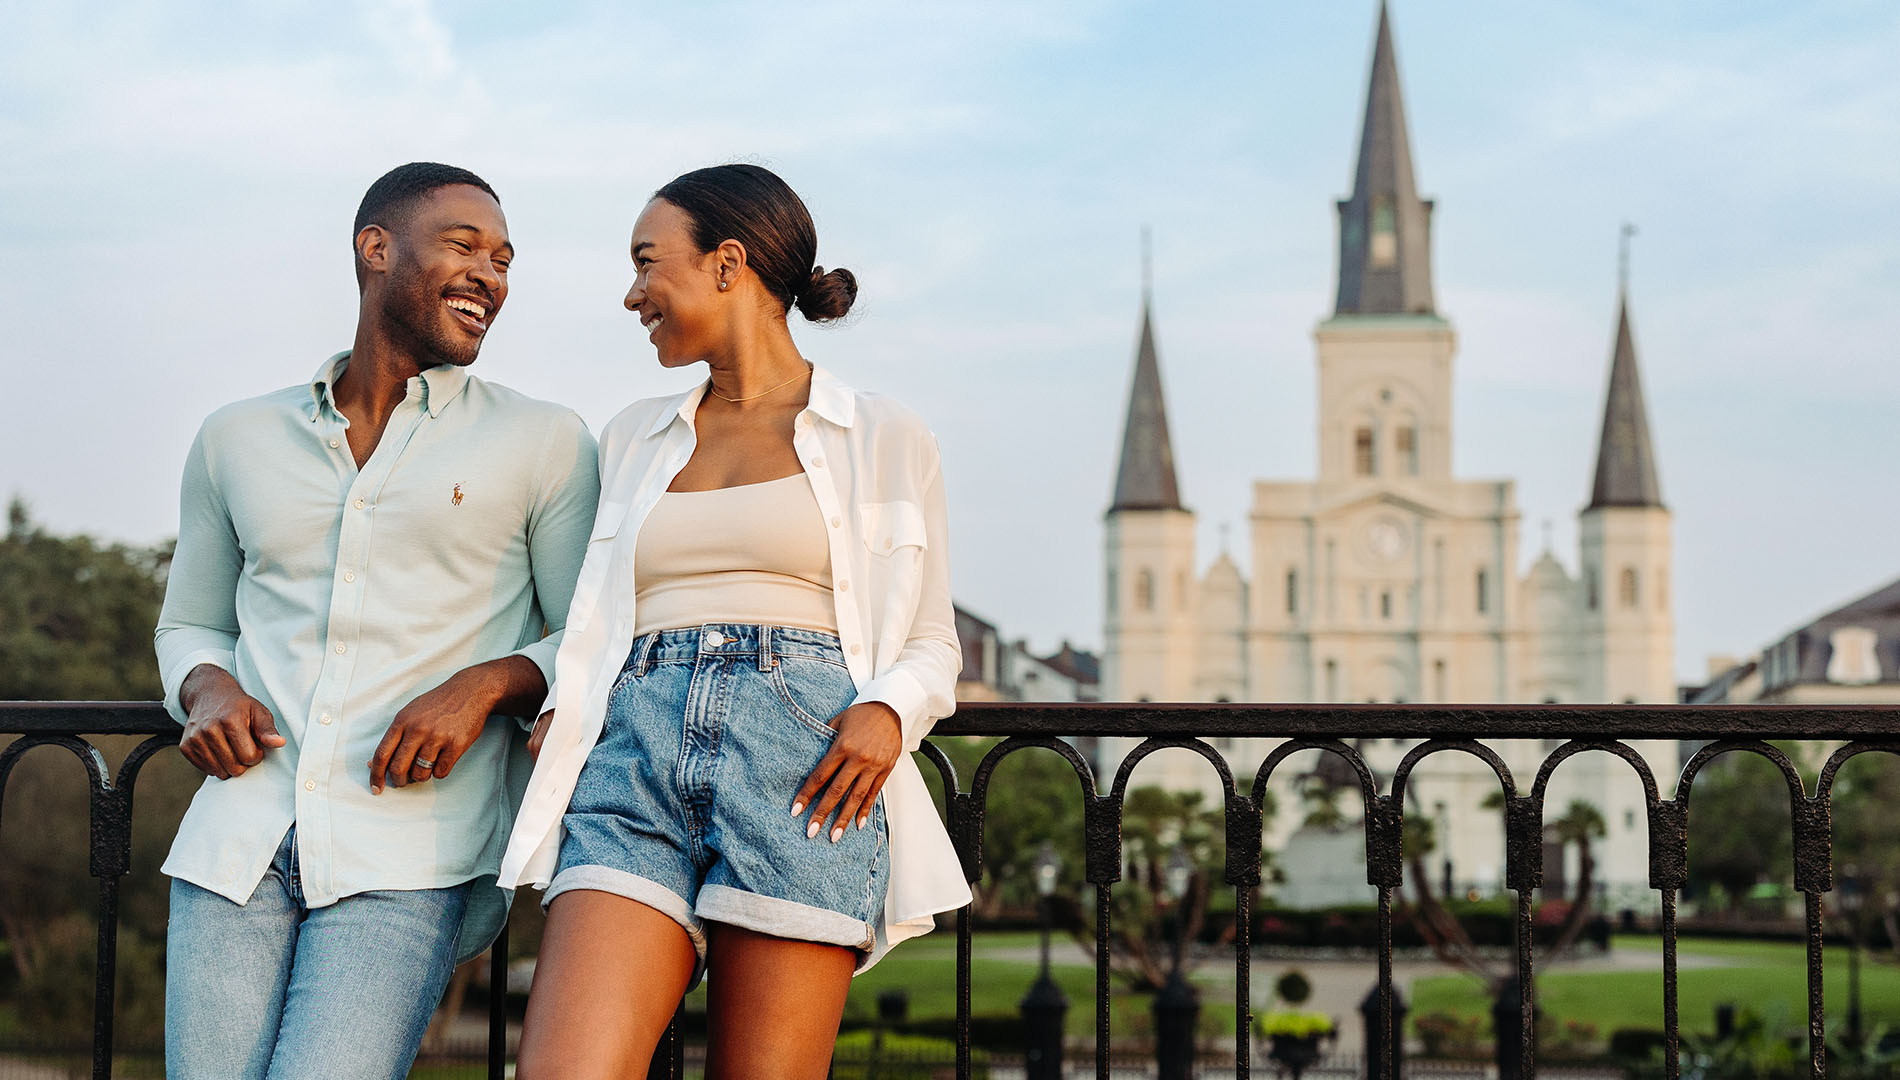 A smiling couple leans on a fence in New Orleans, Louisiana